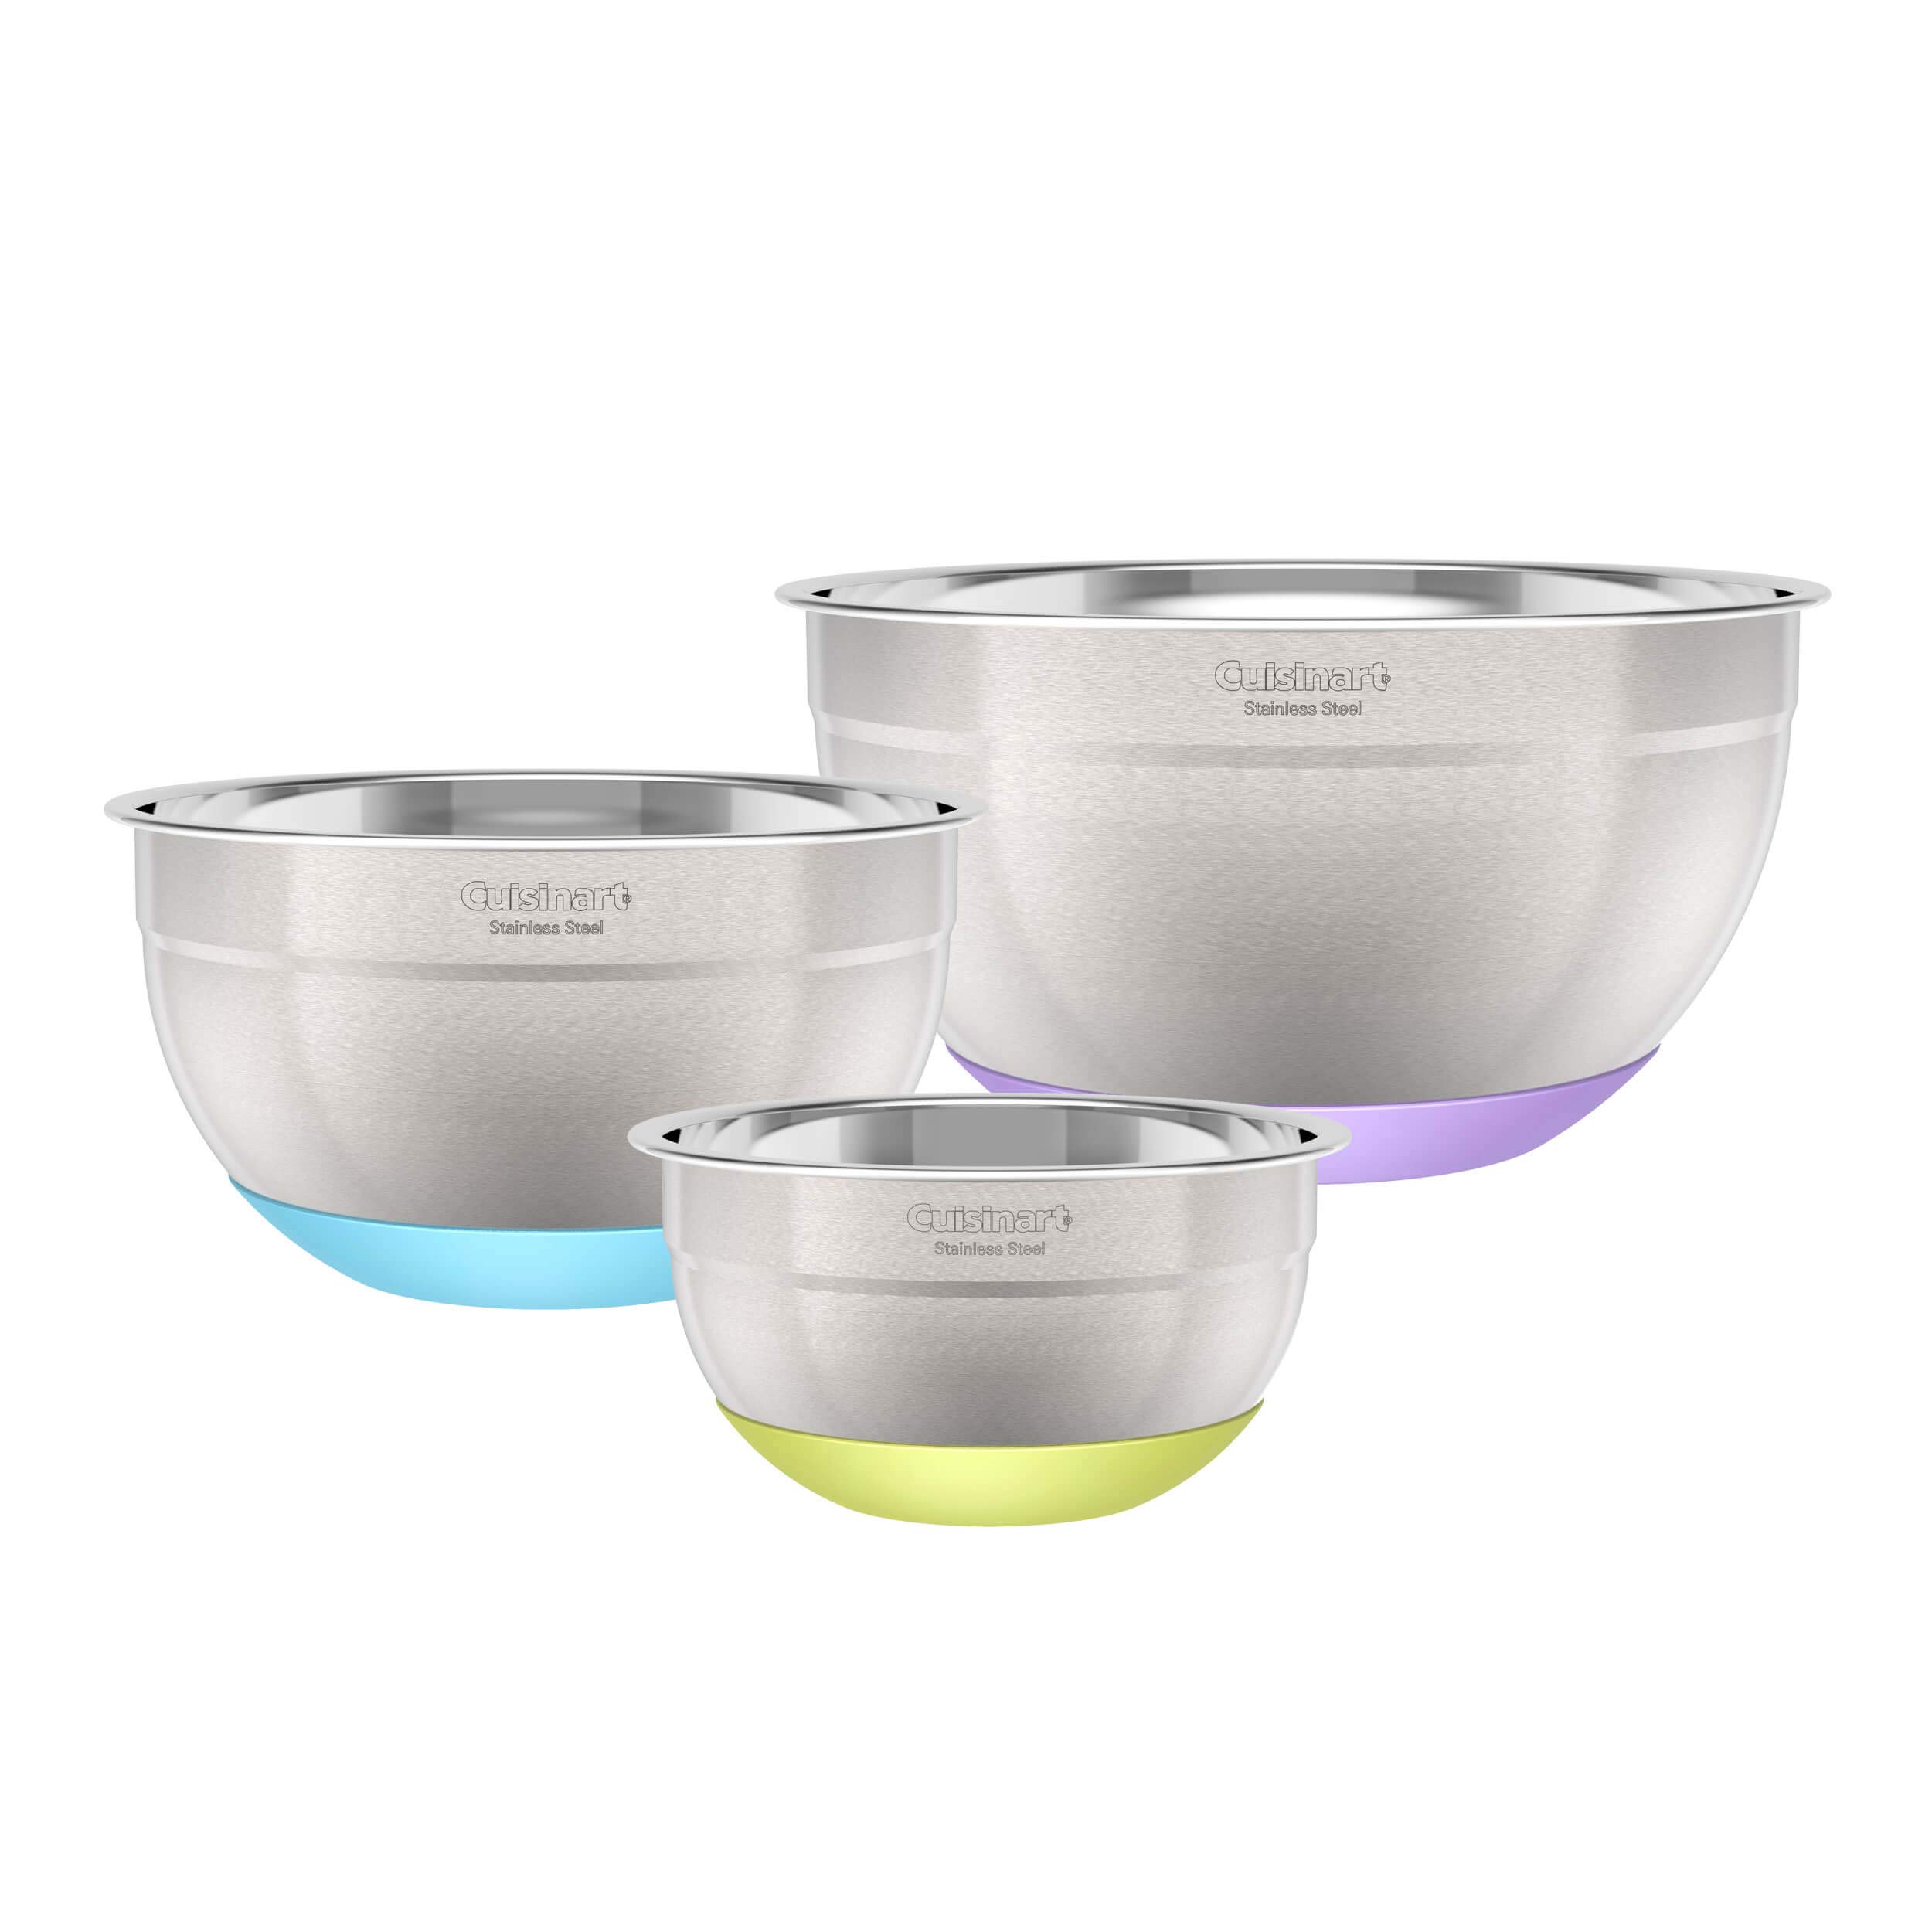 Cuisinart 3-Piece Stainless Steel Mixing Bowls with Nonslip Base, 1.5qt, 3qt & 5qt